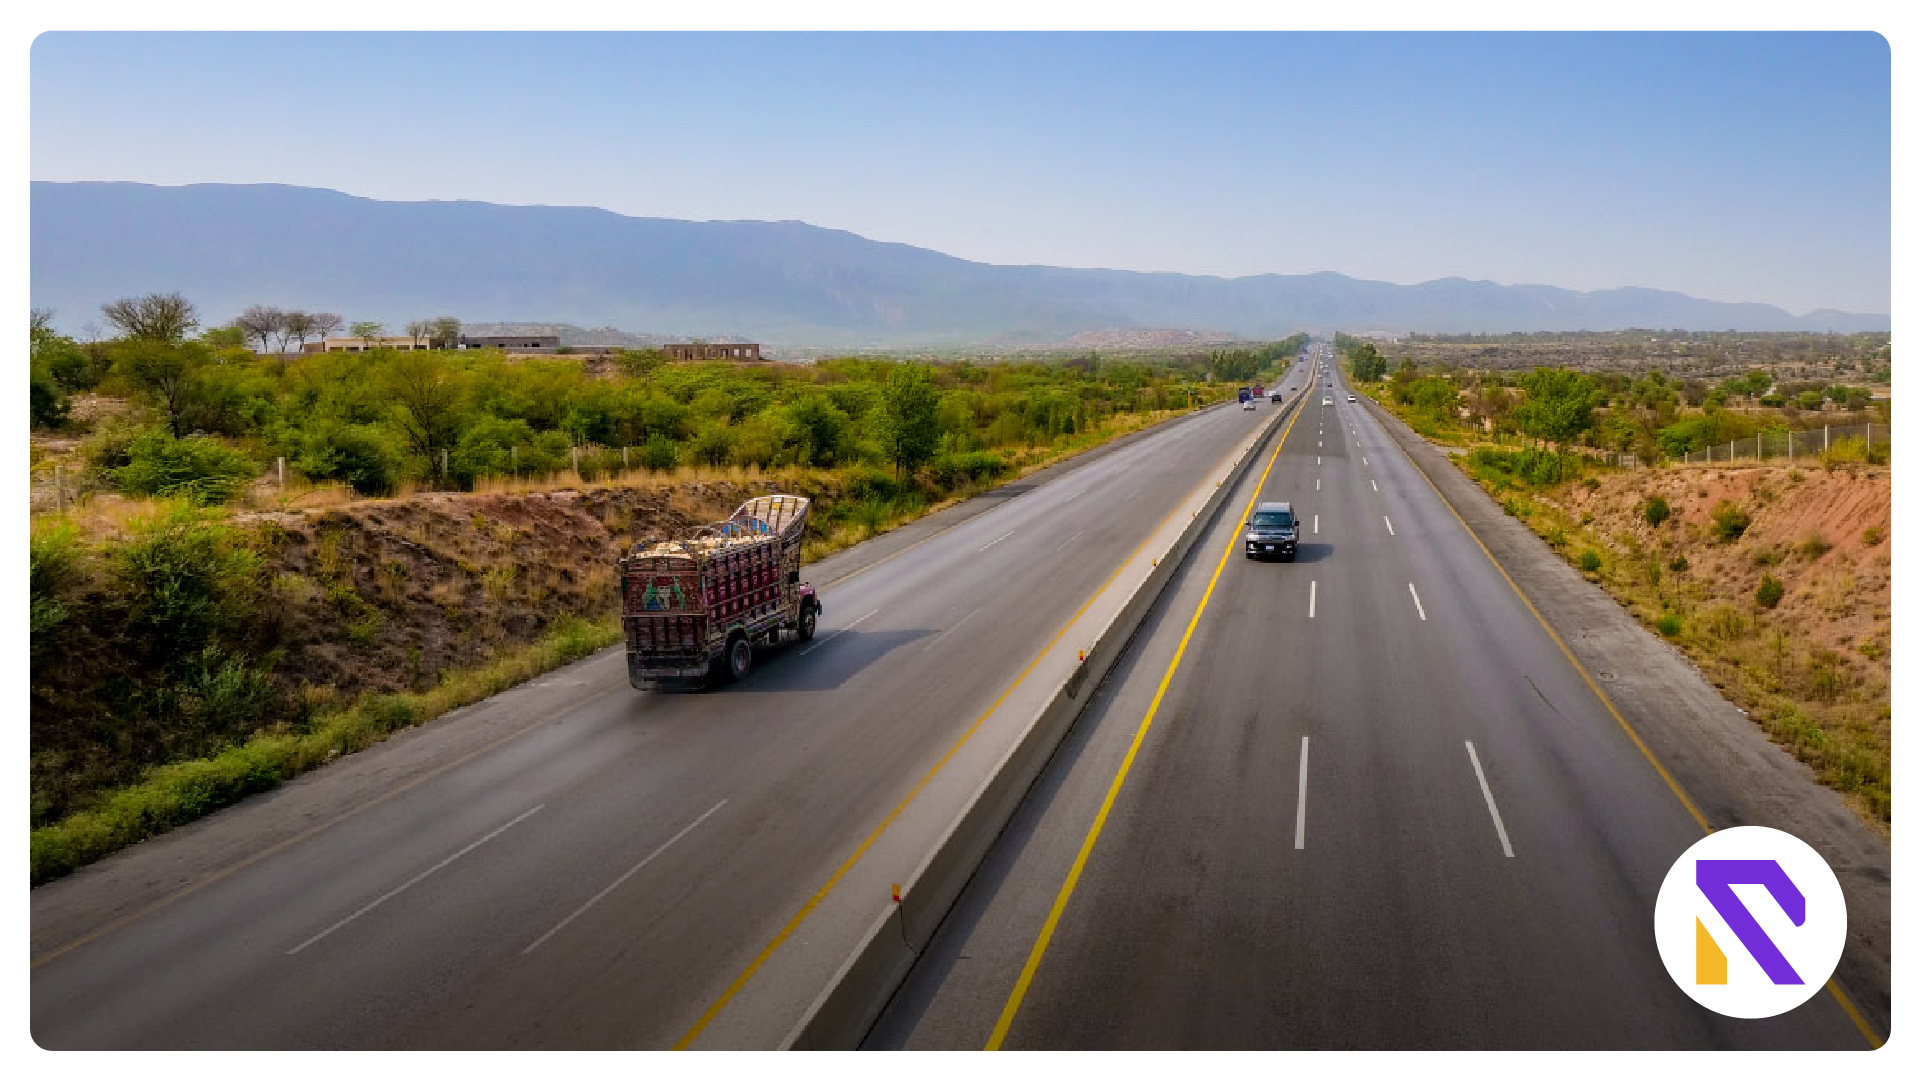 NHA has launched the construction work on Kharian-Sambrial Motorway